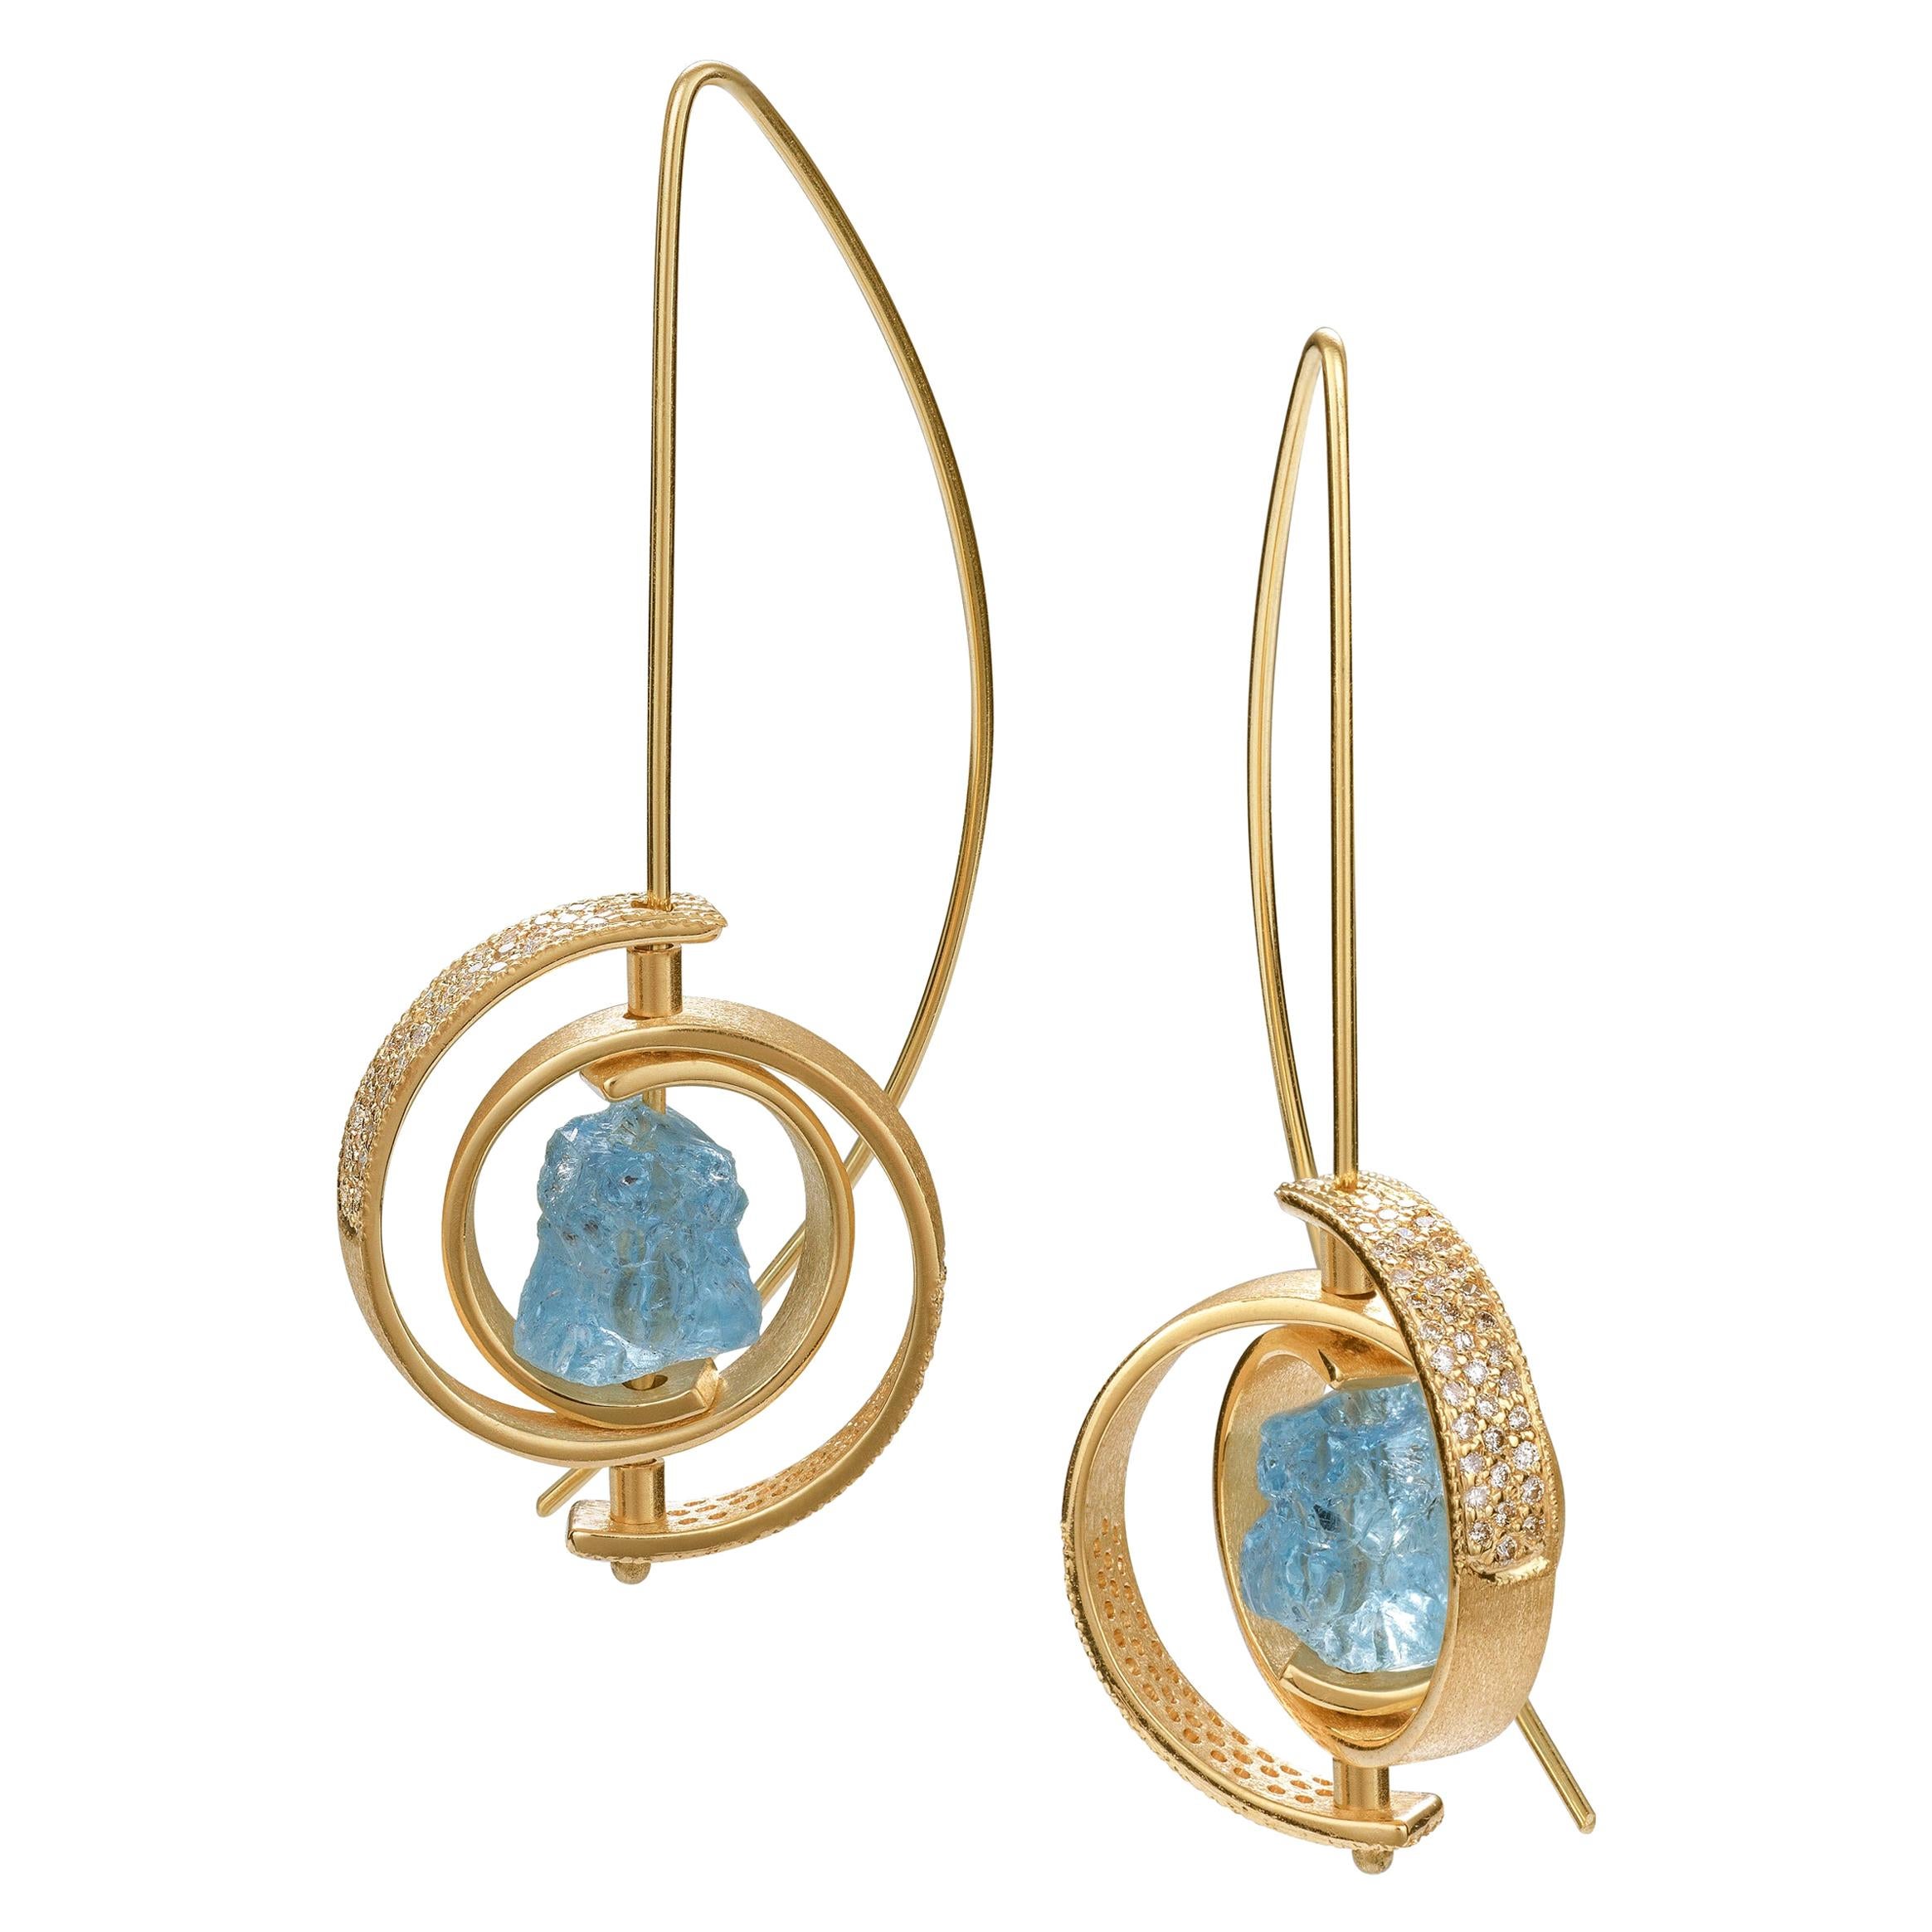 Dangle Earrings in Gold with Rough Aquamarines and Pave Diamonds